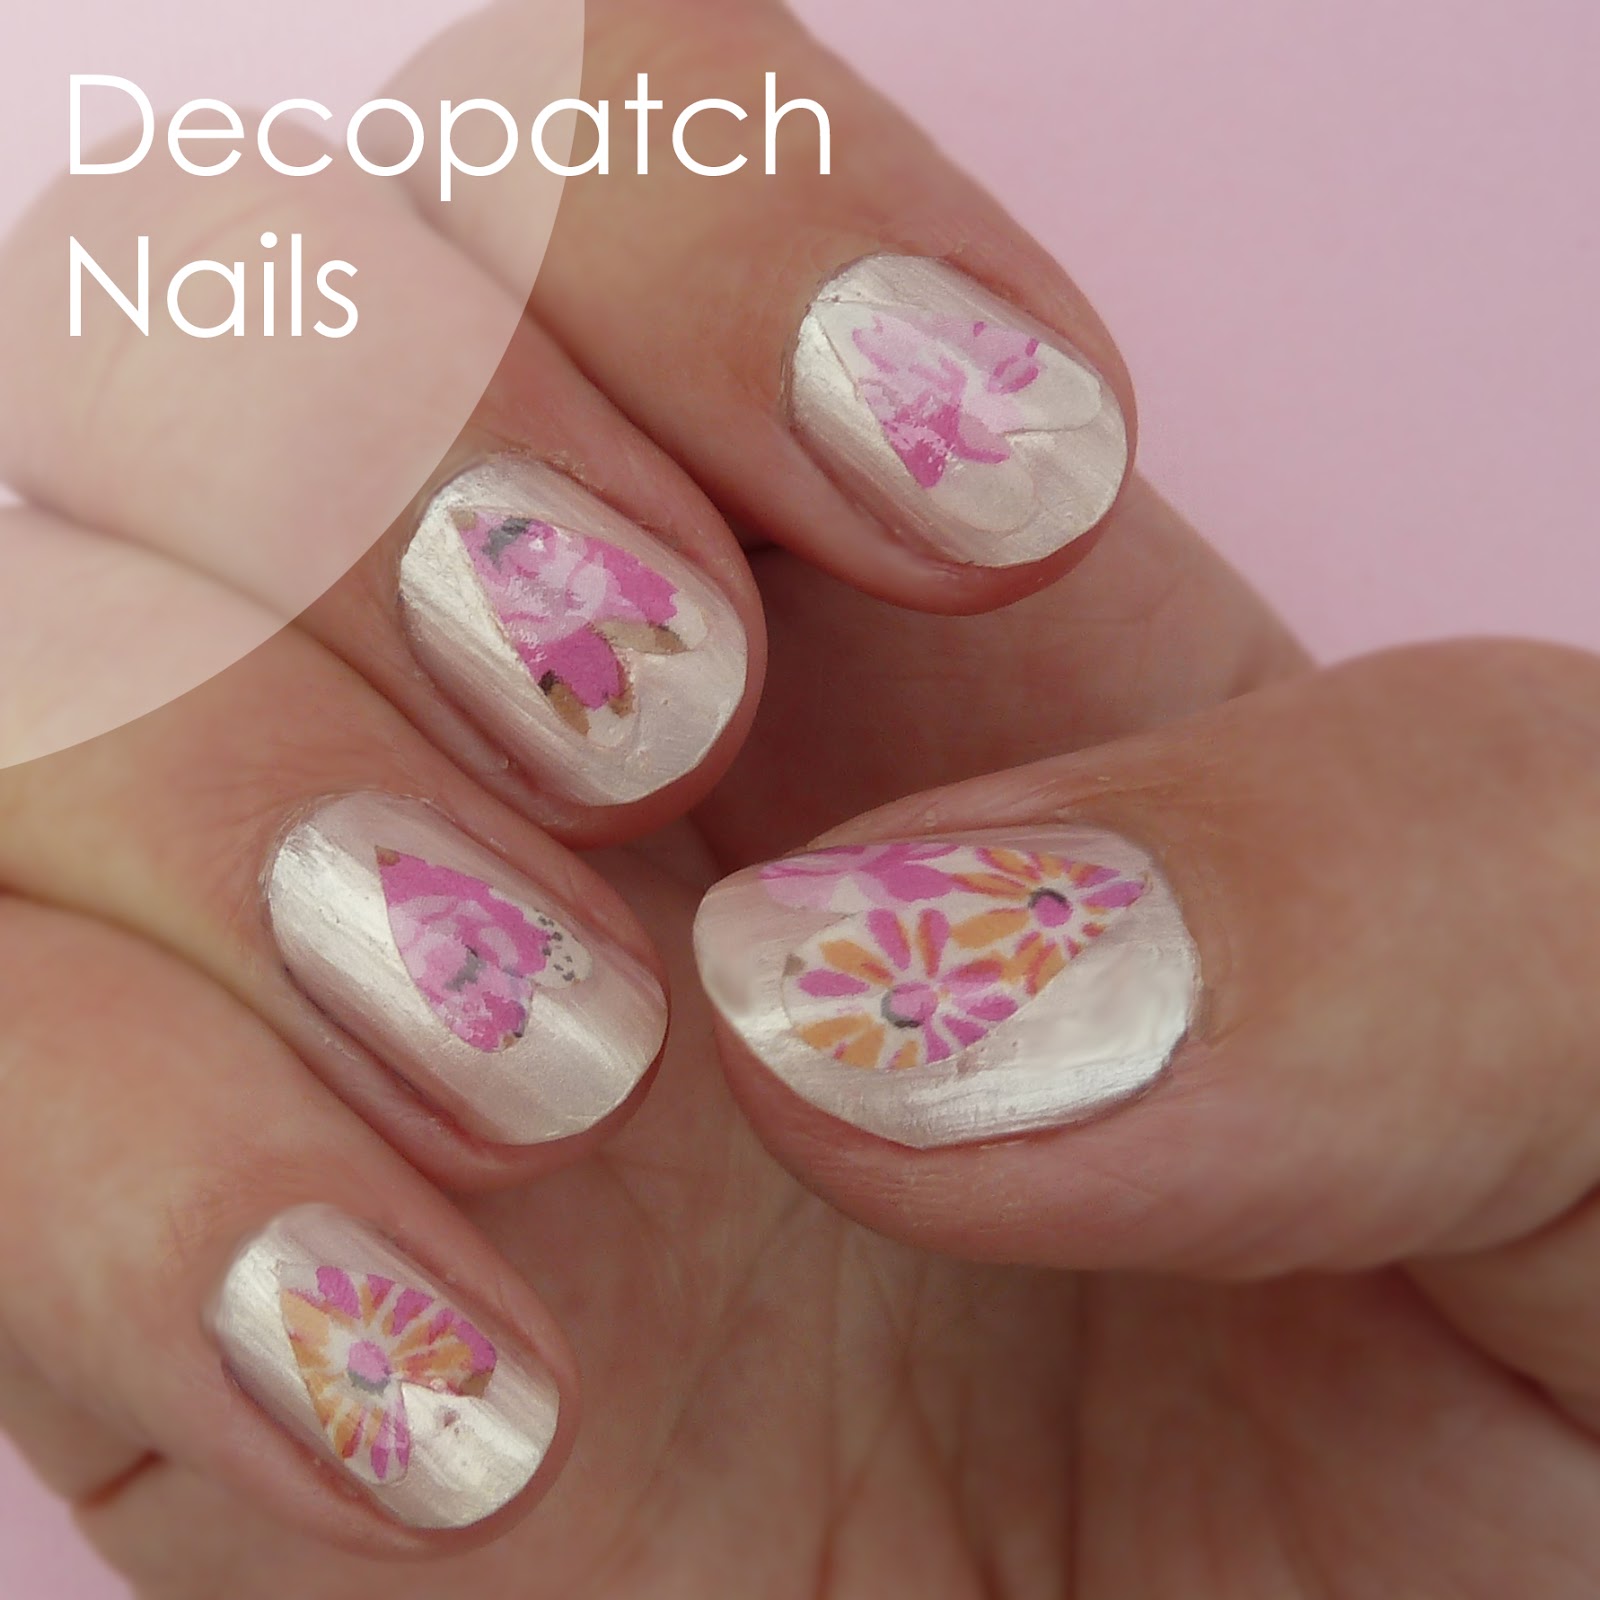 Decopatch Nails - Take two | Craft me Happy!: Decopatch Nails - Take two